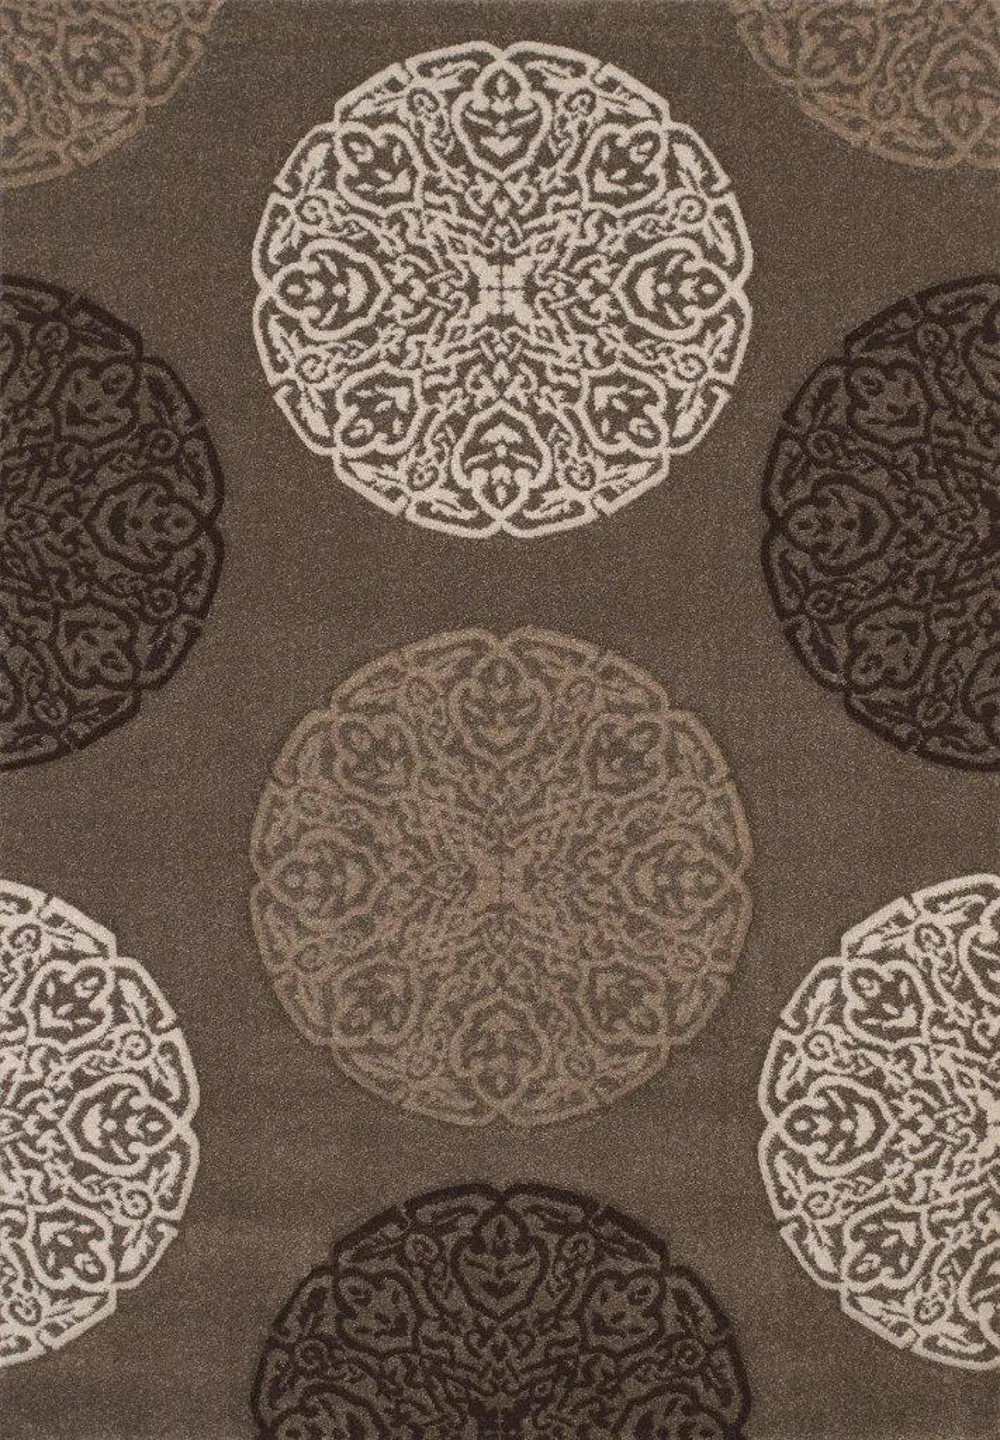 8 x 11 Large Brown Area Rug - Townshend-1